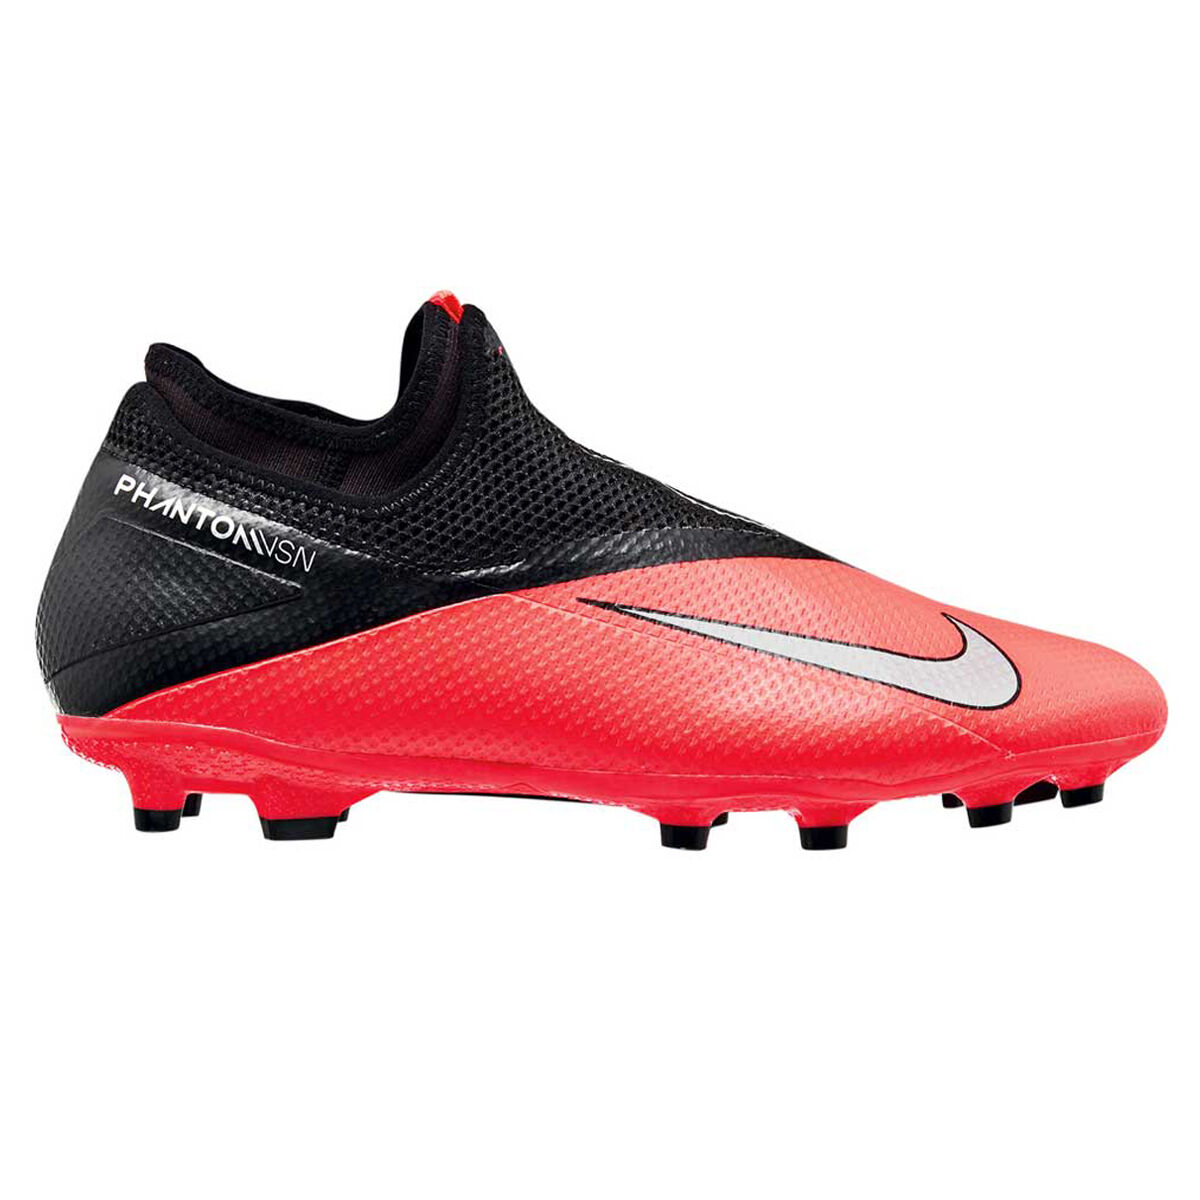 nike academy black and red